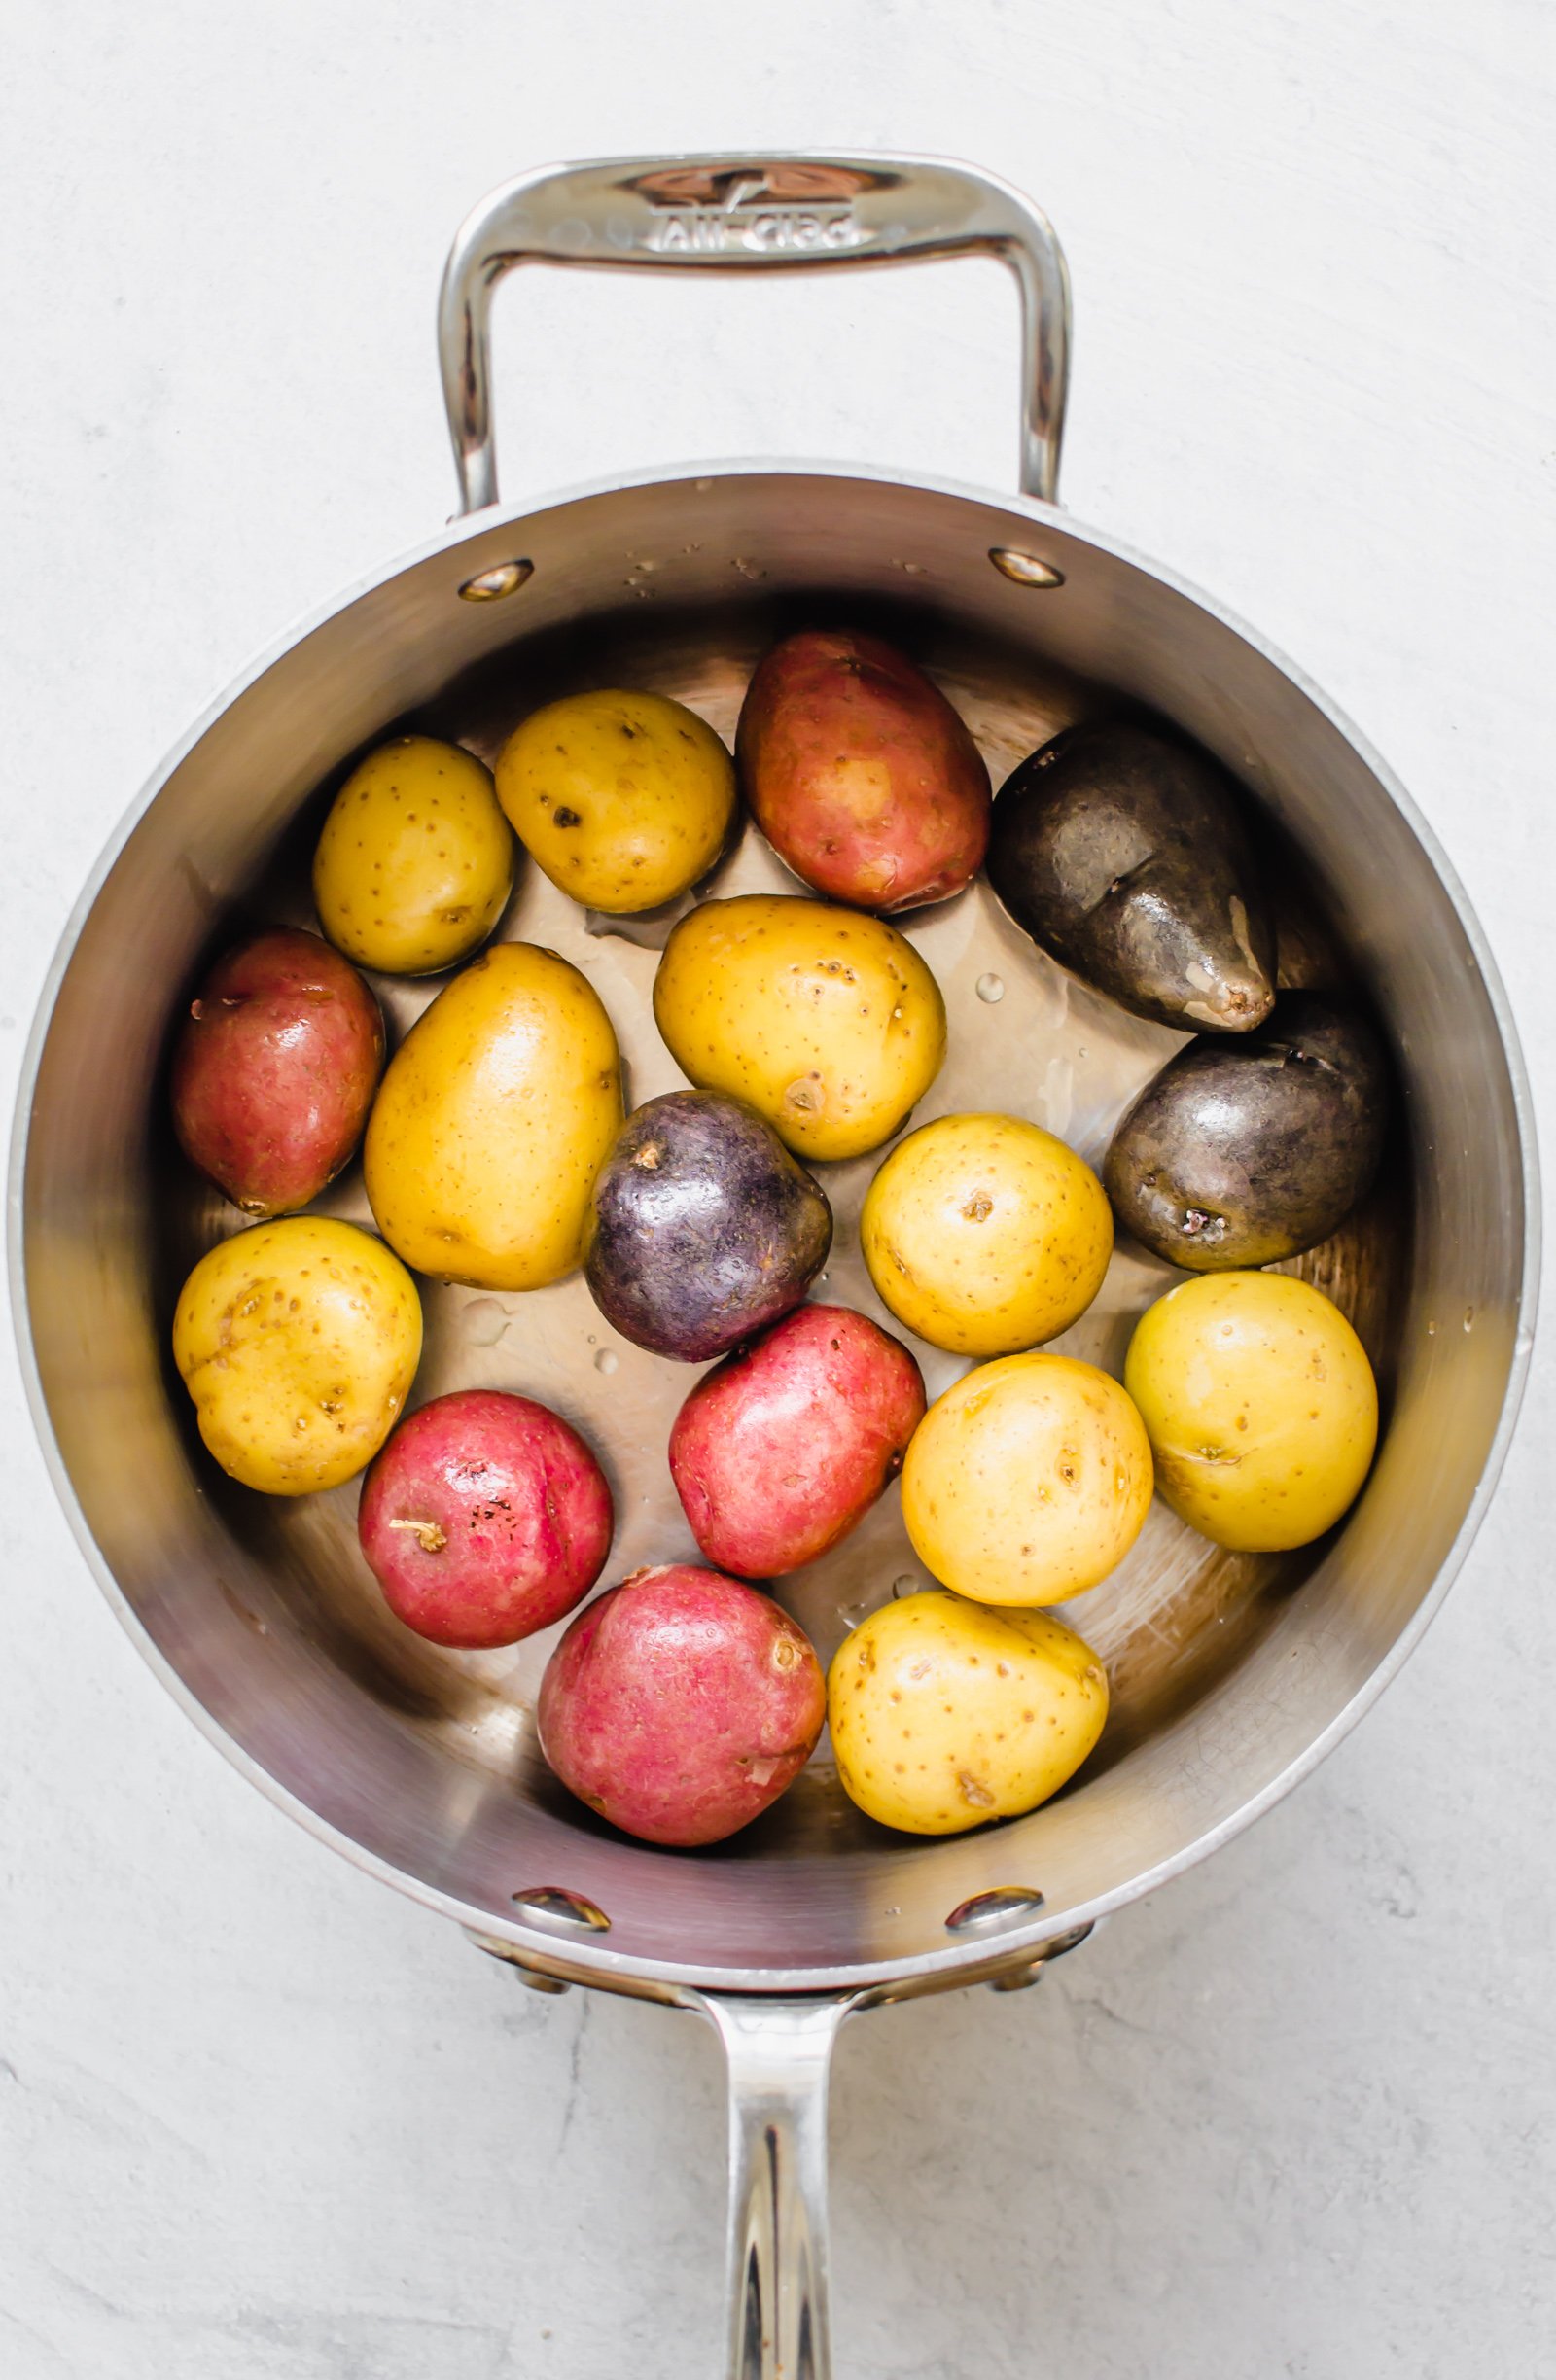 Washed baby potatoes in a metal pot.